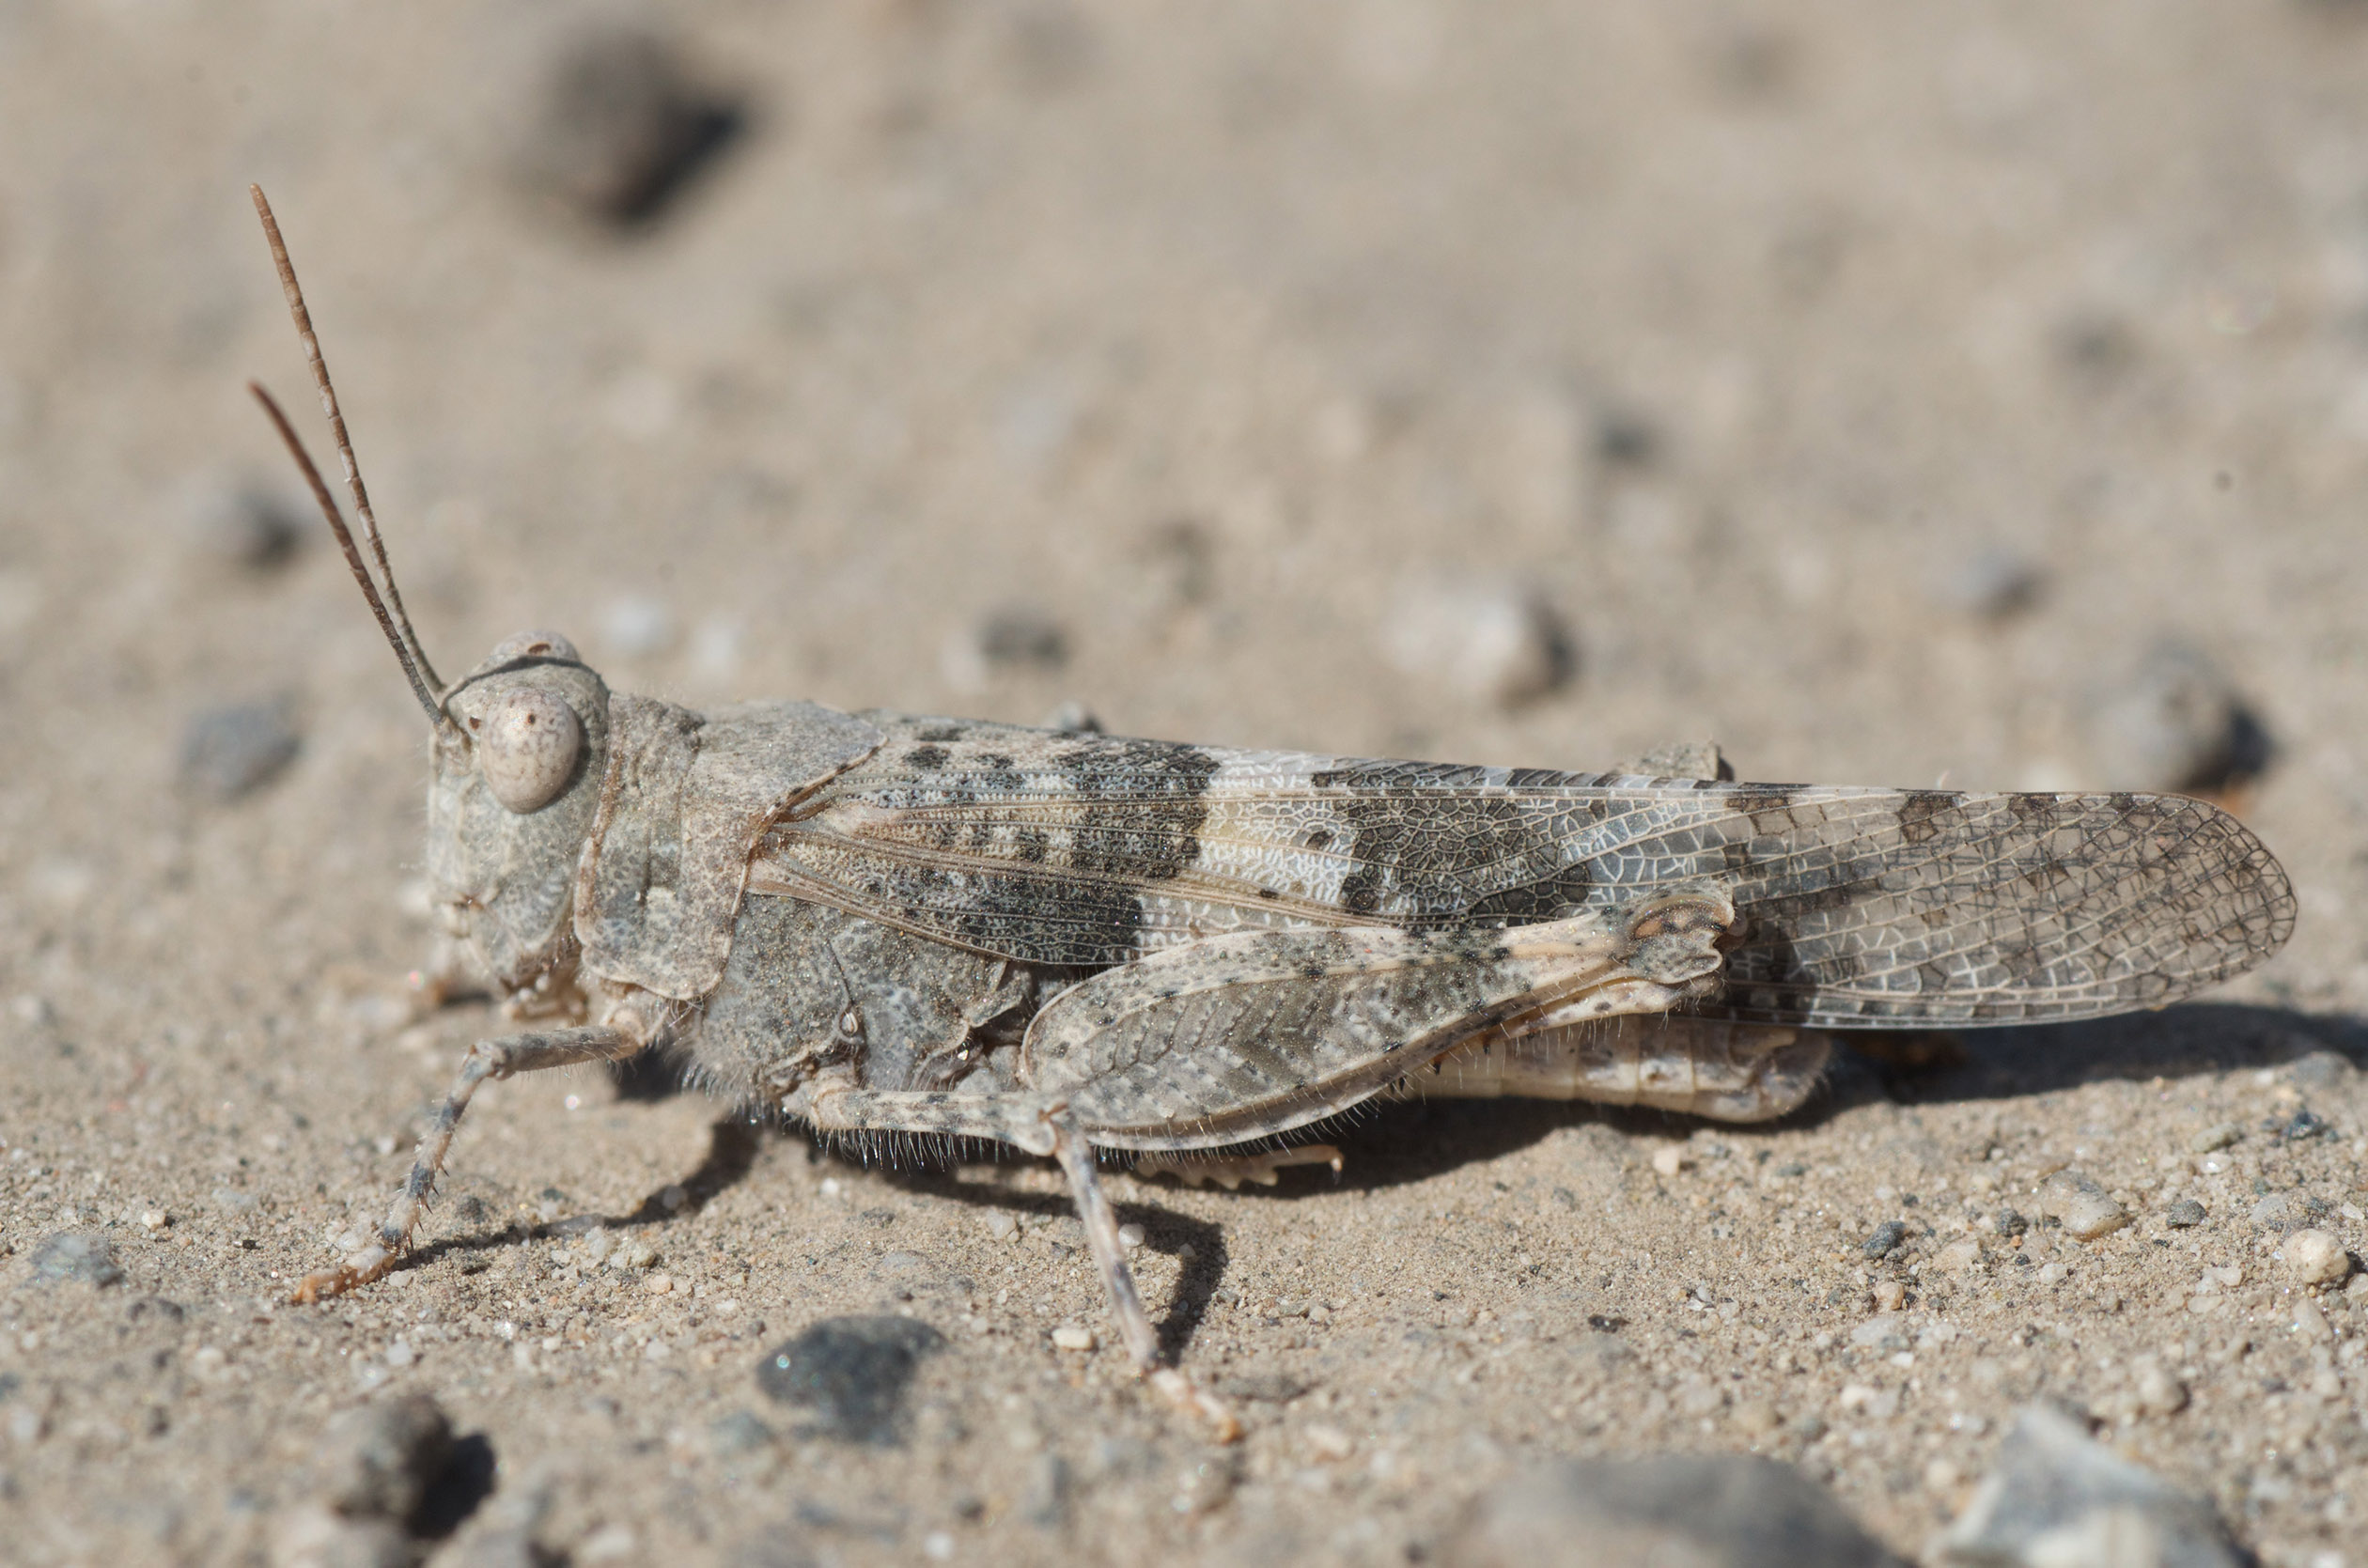 The pale brown mottled colors of this grasshopper blend well with the bare soil